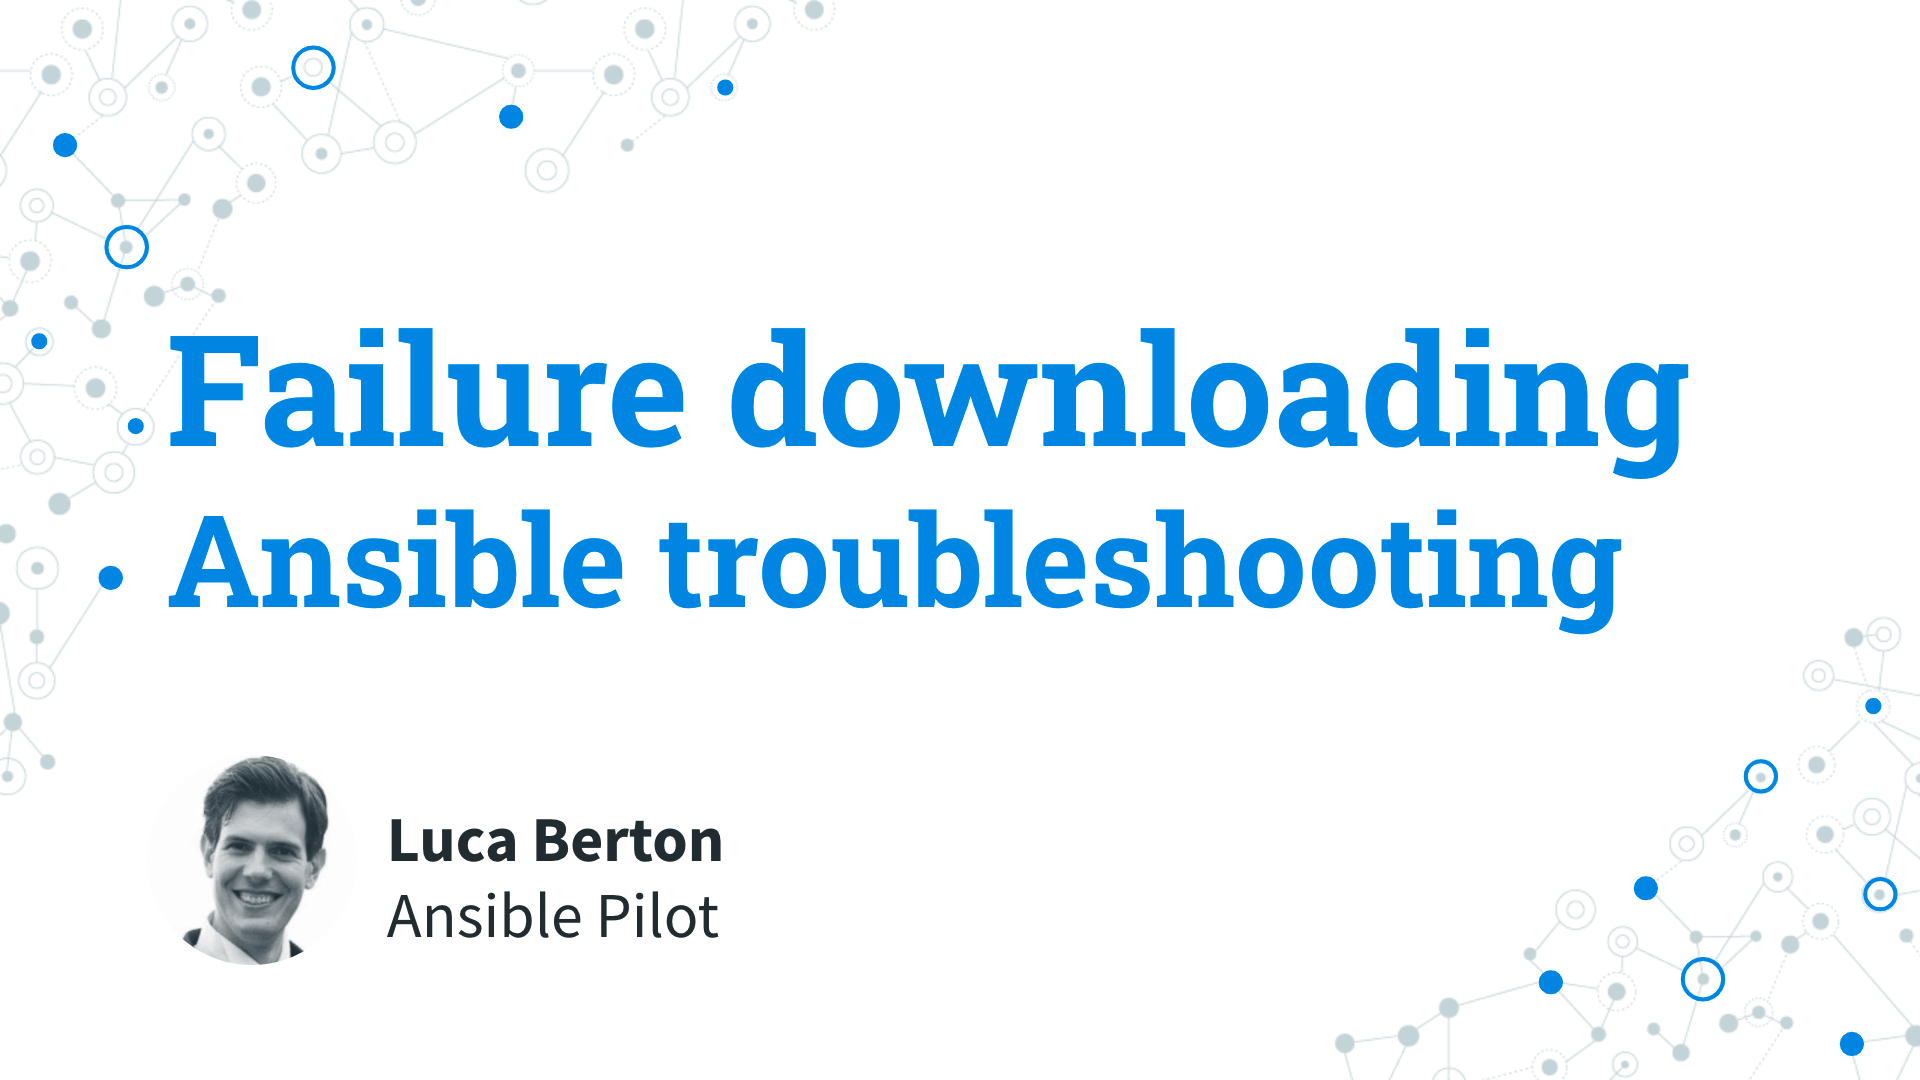 Ansible troubleshooting - failure downloading